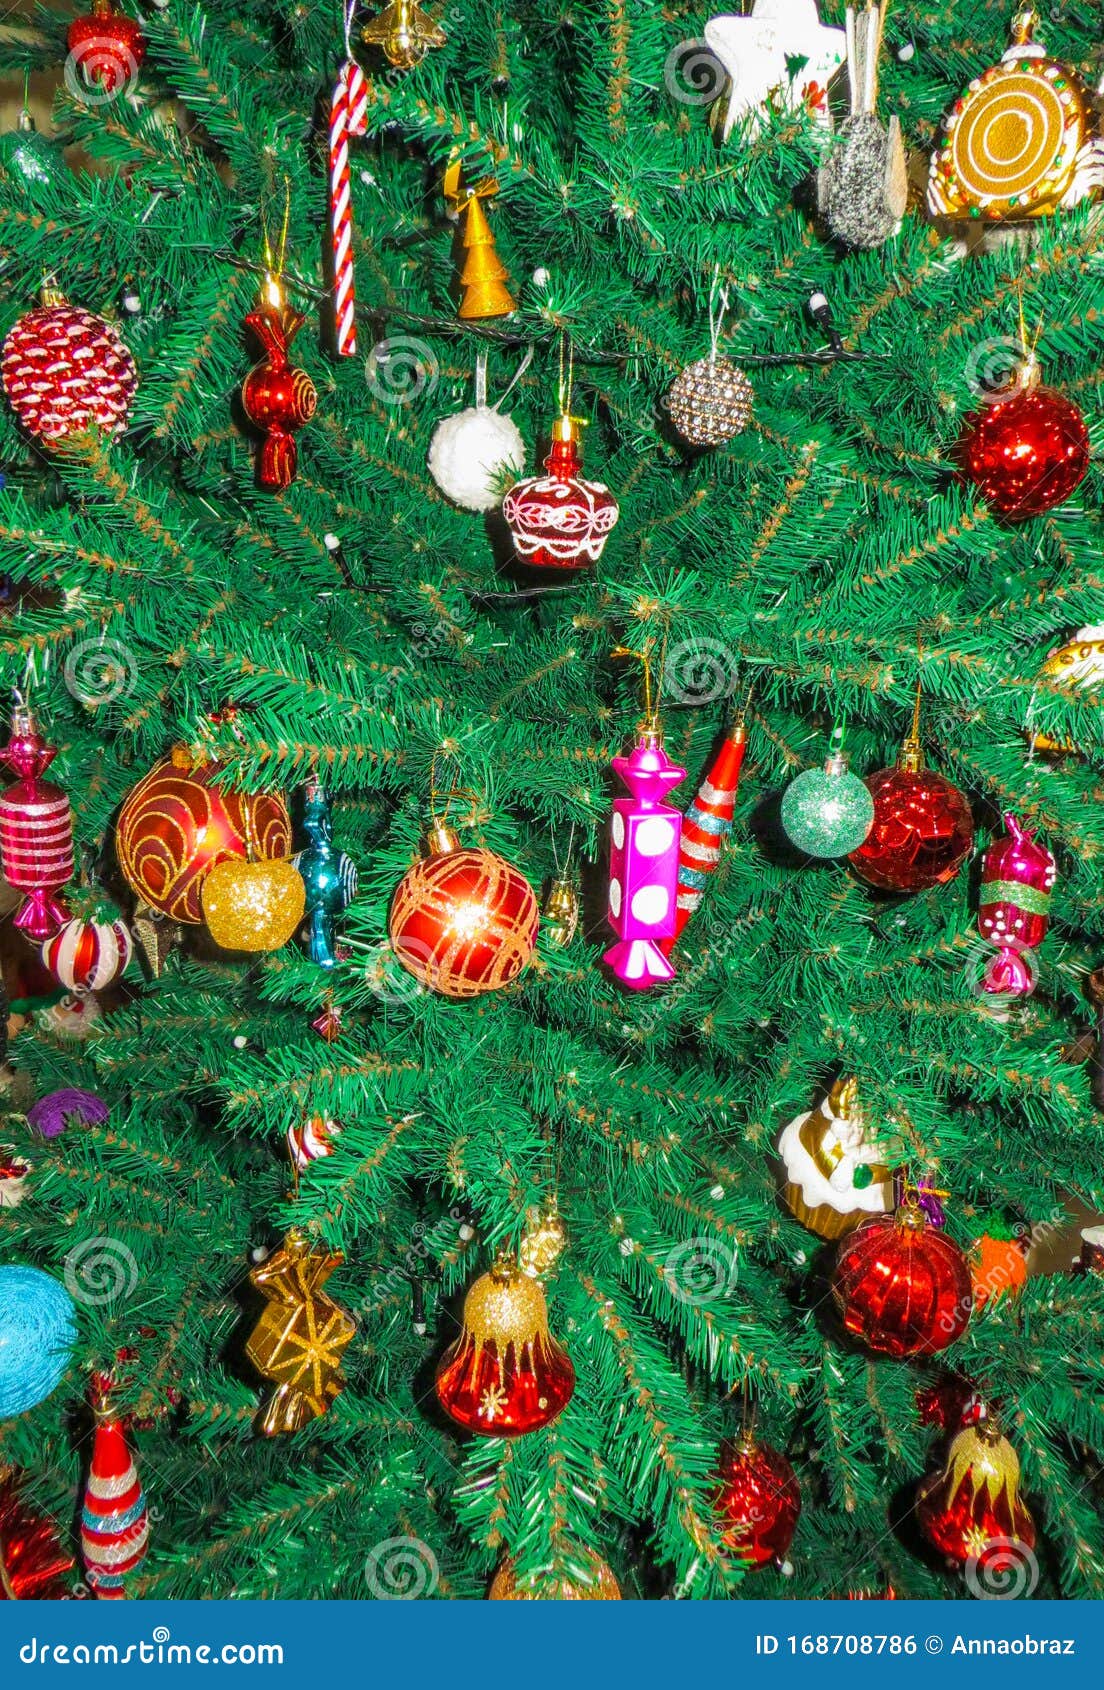 A Lot of Christmas Tree Toys on the Tree Stock Photo - Image of home ...